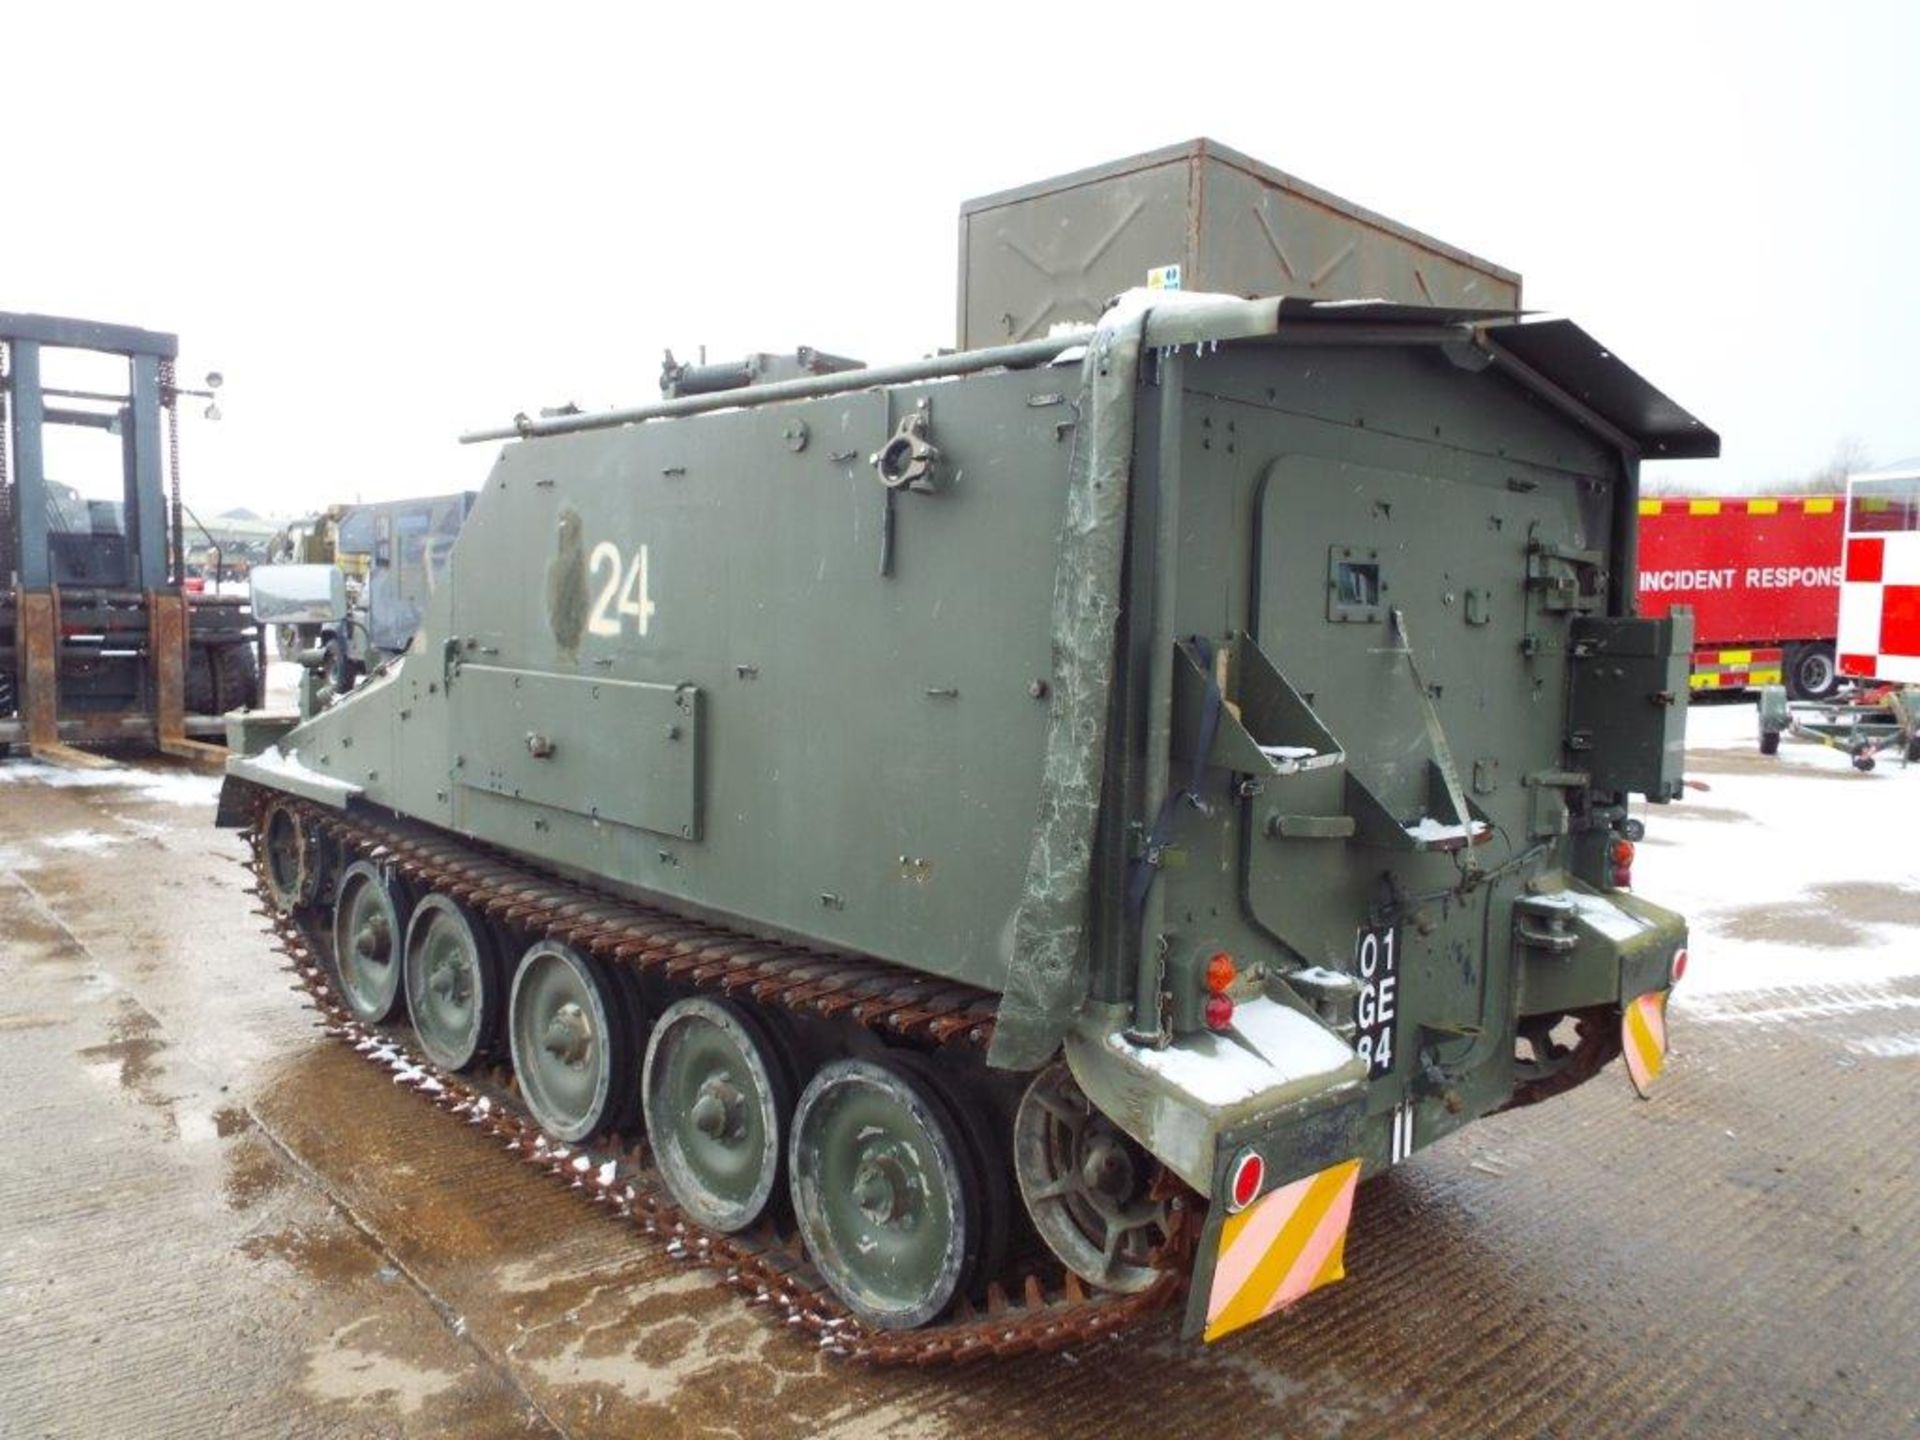 Dieselised CVRT FV105 Sultan Armoured Personnel Carrier with David Brown TN15e Gearbox - Image 5 of 26